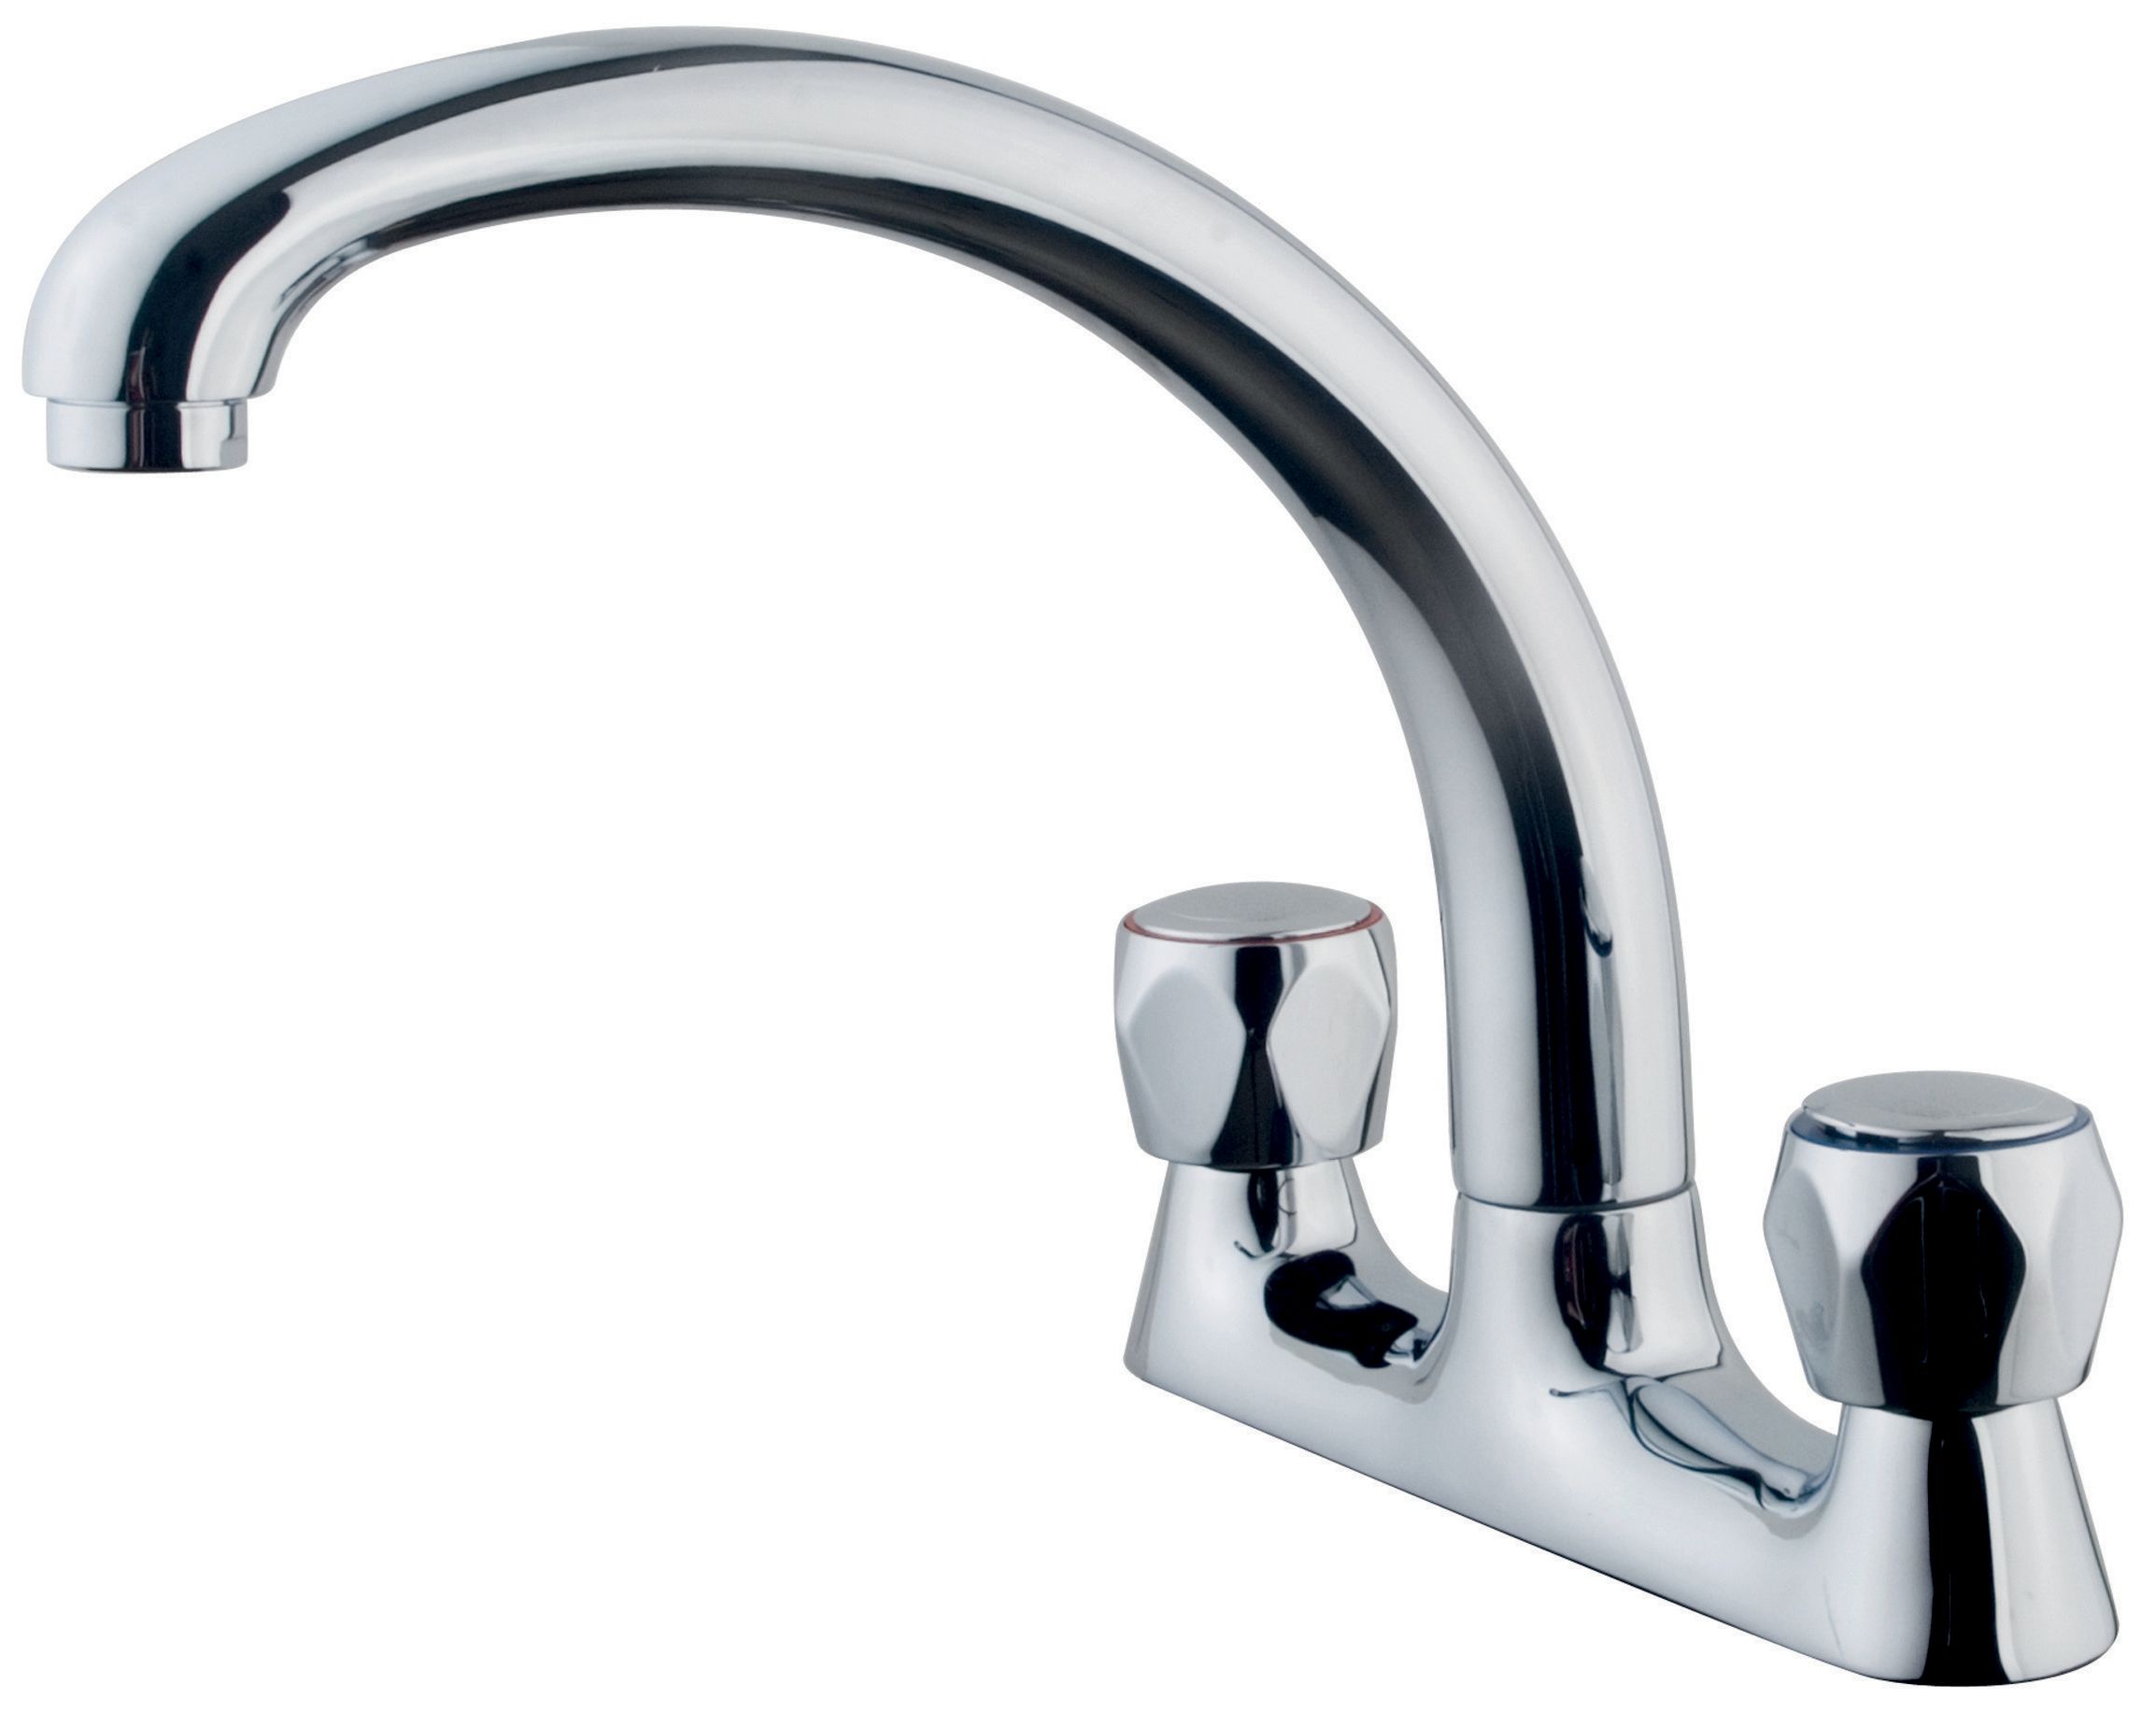 Image of Wickes Trade Deck Kitchen Sink Mixer Tap - Chrome